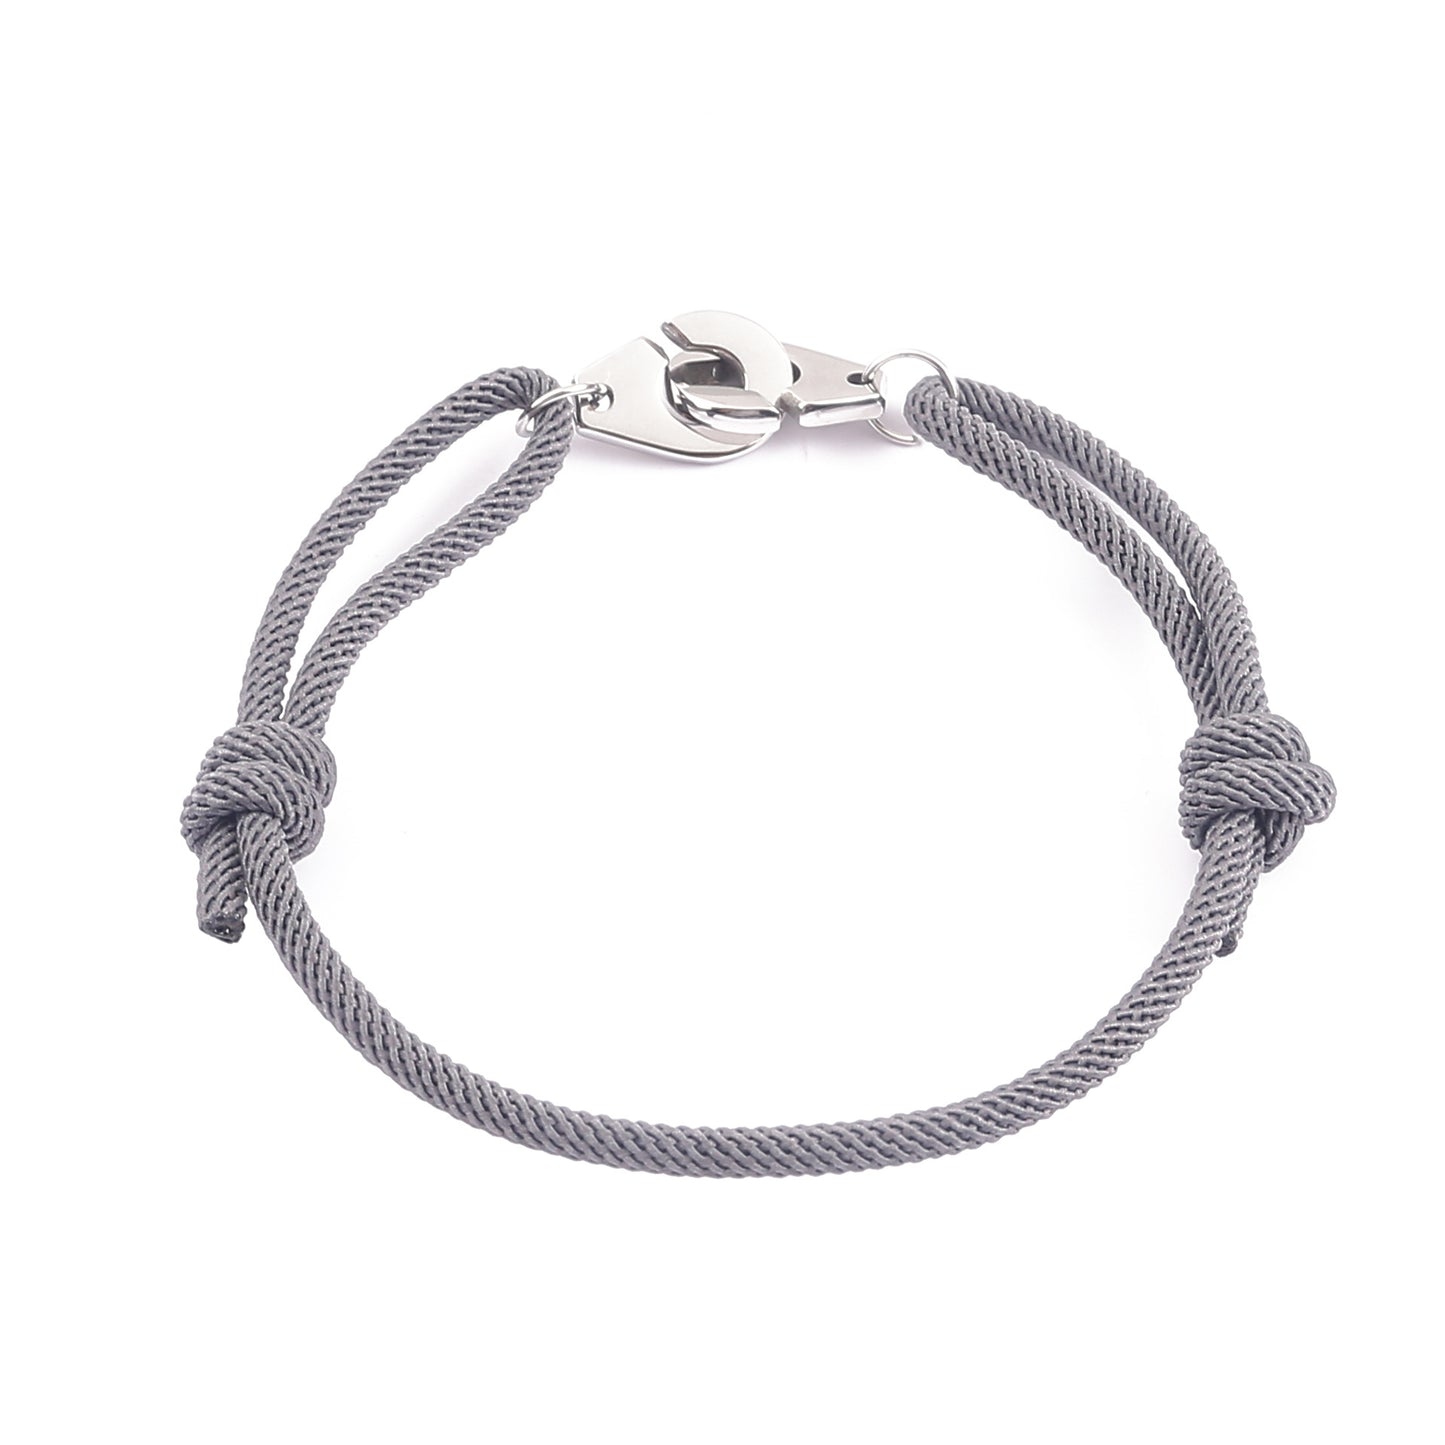 Women's & Men's & Handcuffs Adjustable Rope And Jewelry Boat Bracelets